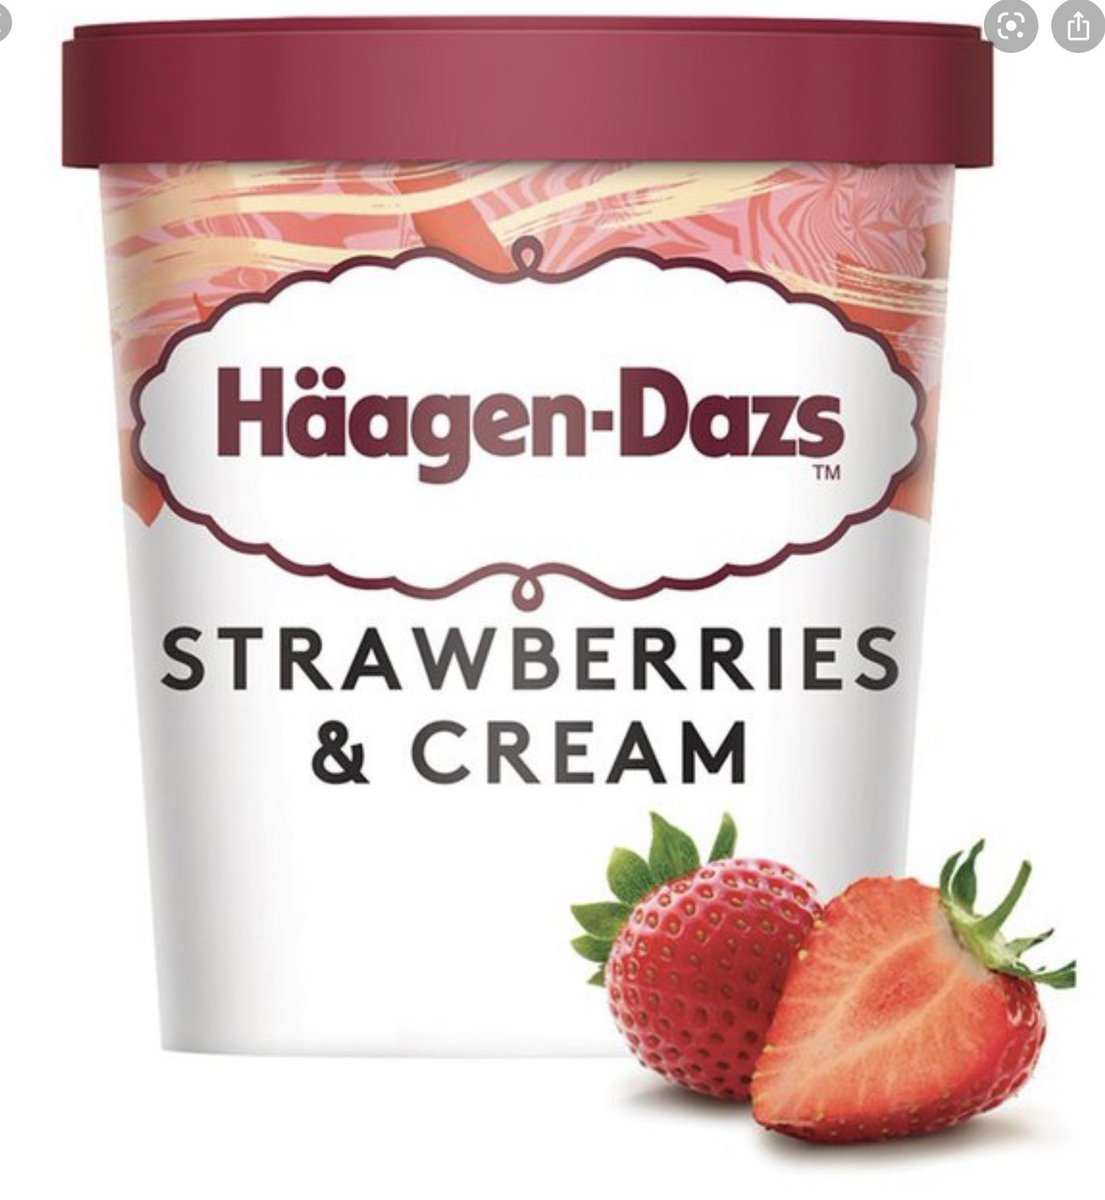  #2020gratitude Häagen-Dazs strawberries and cream. Oh god, it’s so good. (So is the caramel waffle cone stuff, but for pure unadultered goodness...)Listen, I have super willpower because I can eat three spoonfuls and put it back in the freezer until tomorrow.  #haagendazs